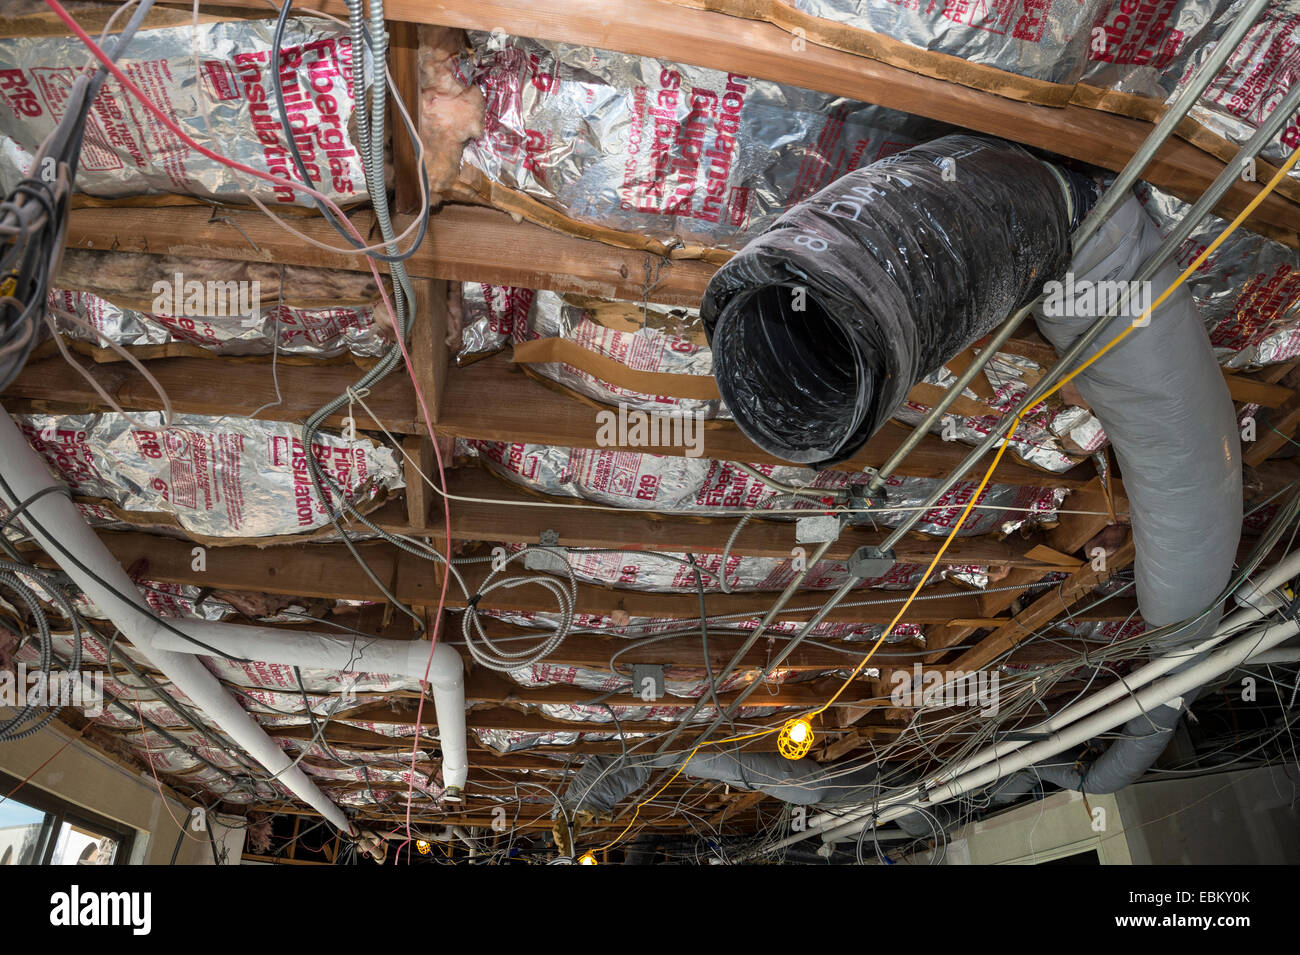 Ceiling Insulation In Building Under Construction Stock Photo